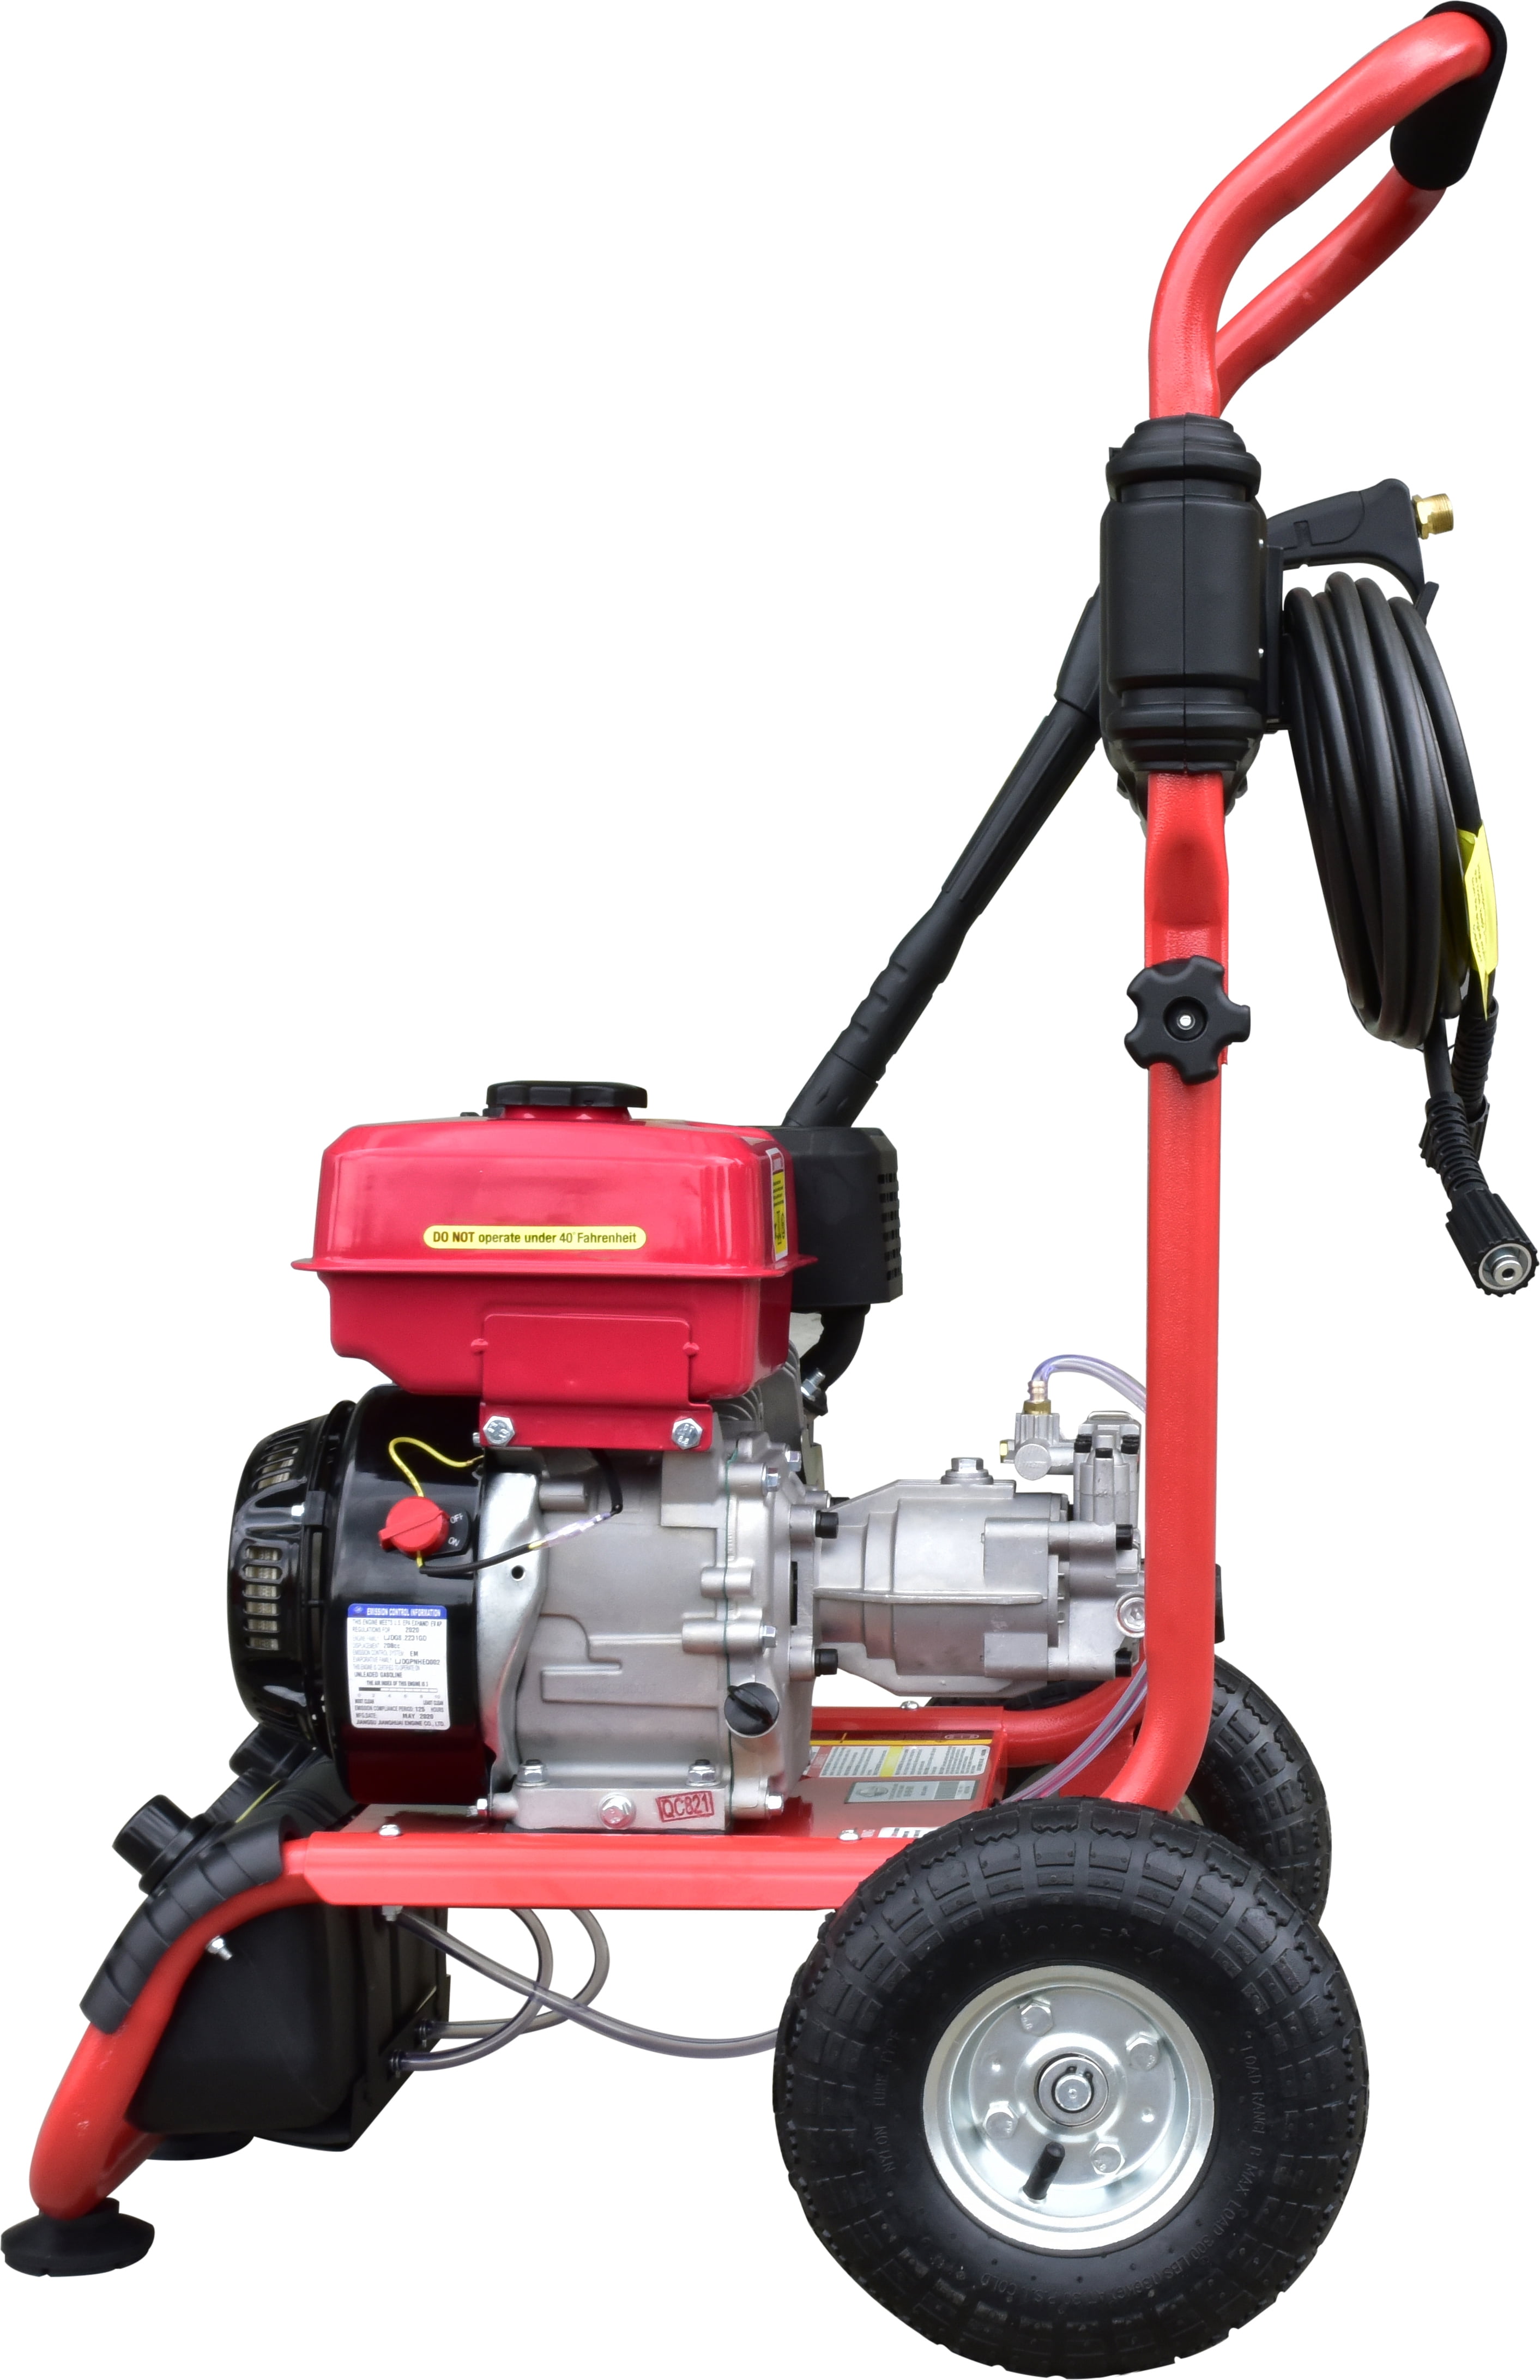 All Power 3400 PSI 2.6 GPM Gas Pressure Washer, 5 Adjustable Nozzles, 30 ft High Pressure Hose, Power Washer for Outdoor Cleaning, APW5129 - 3